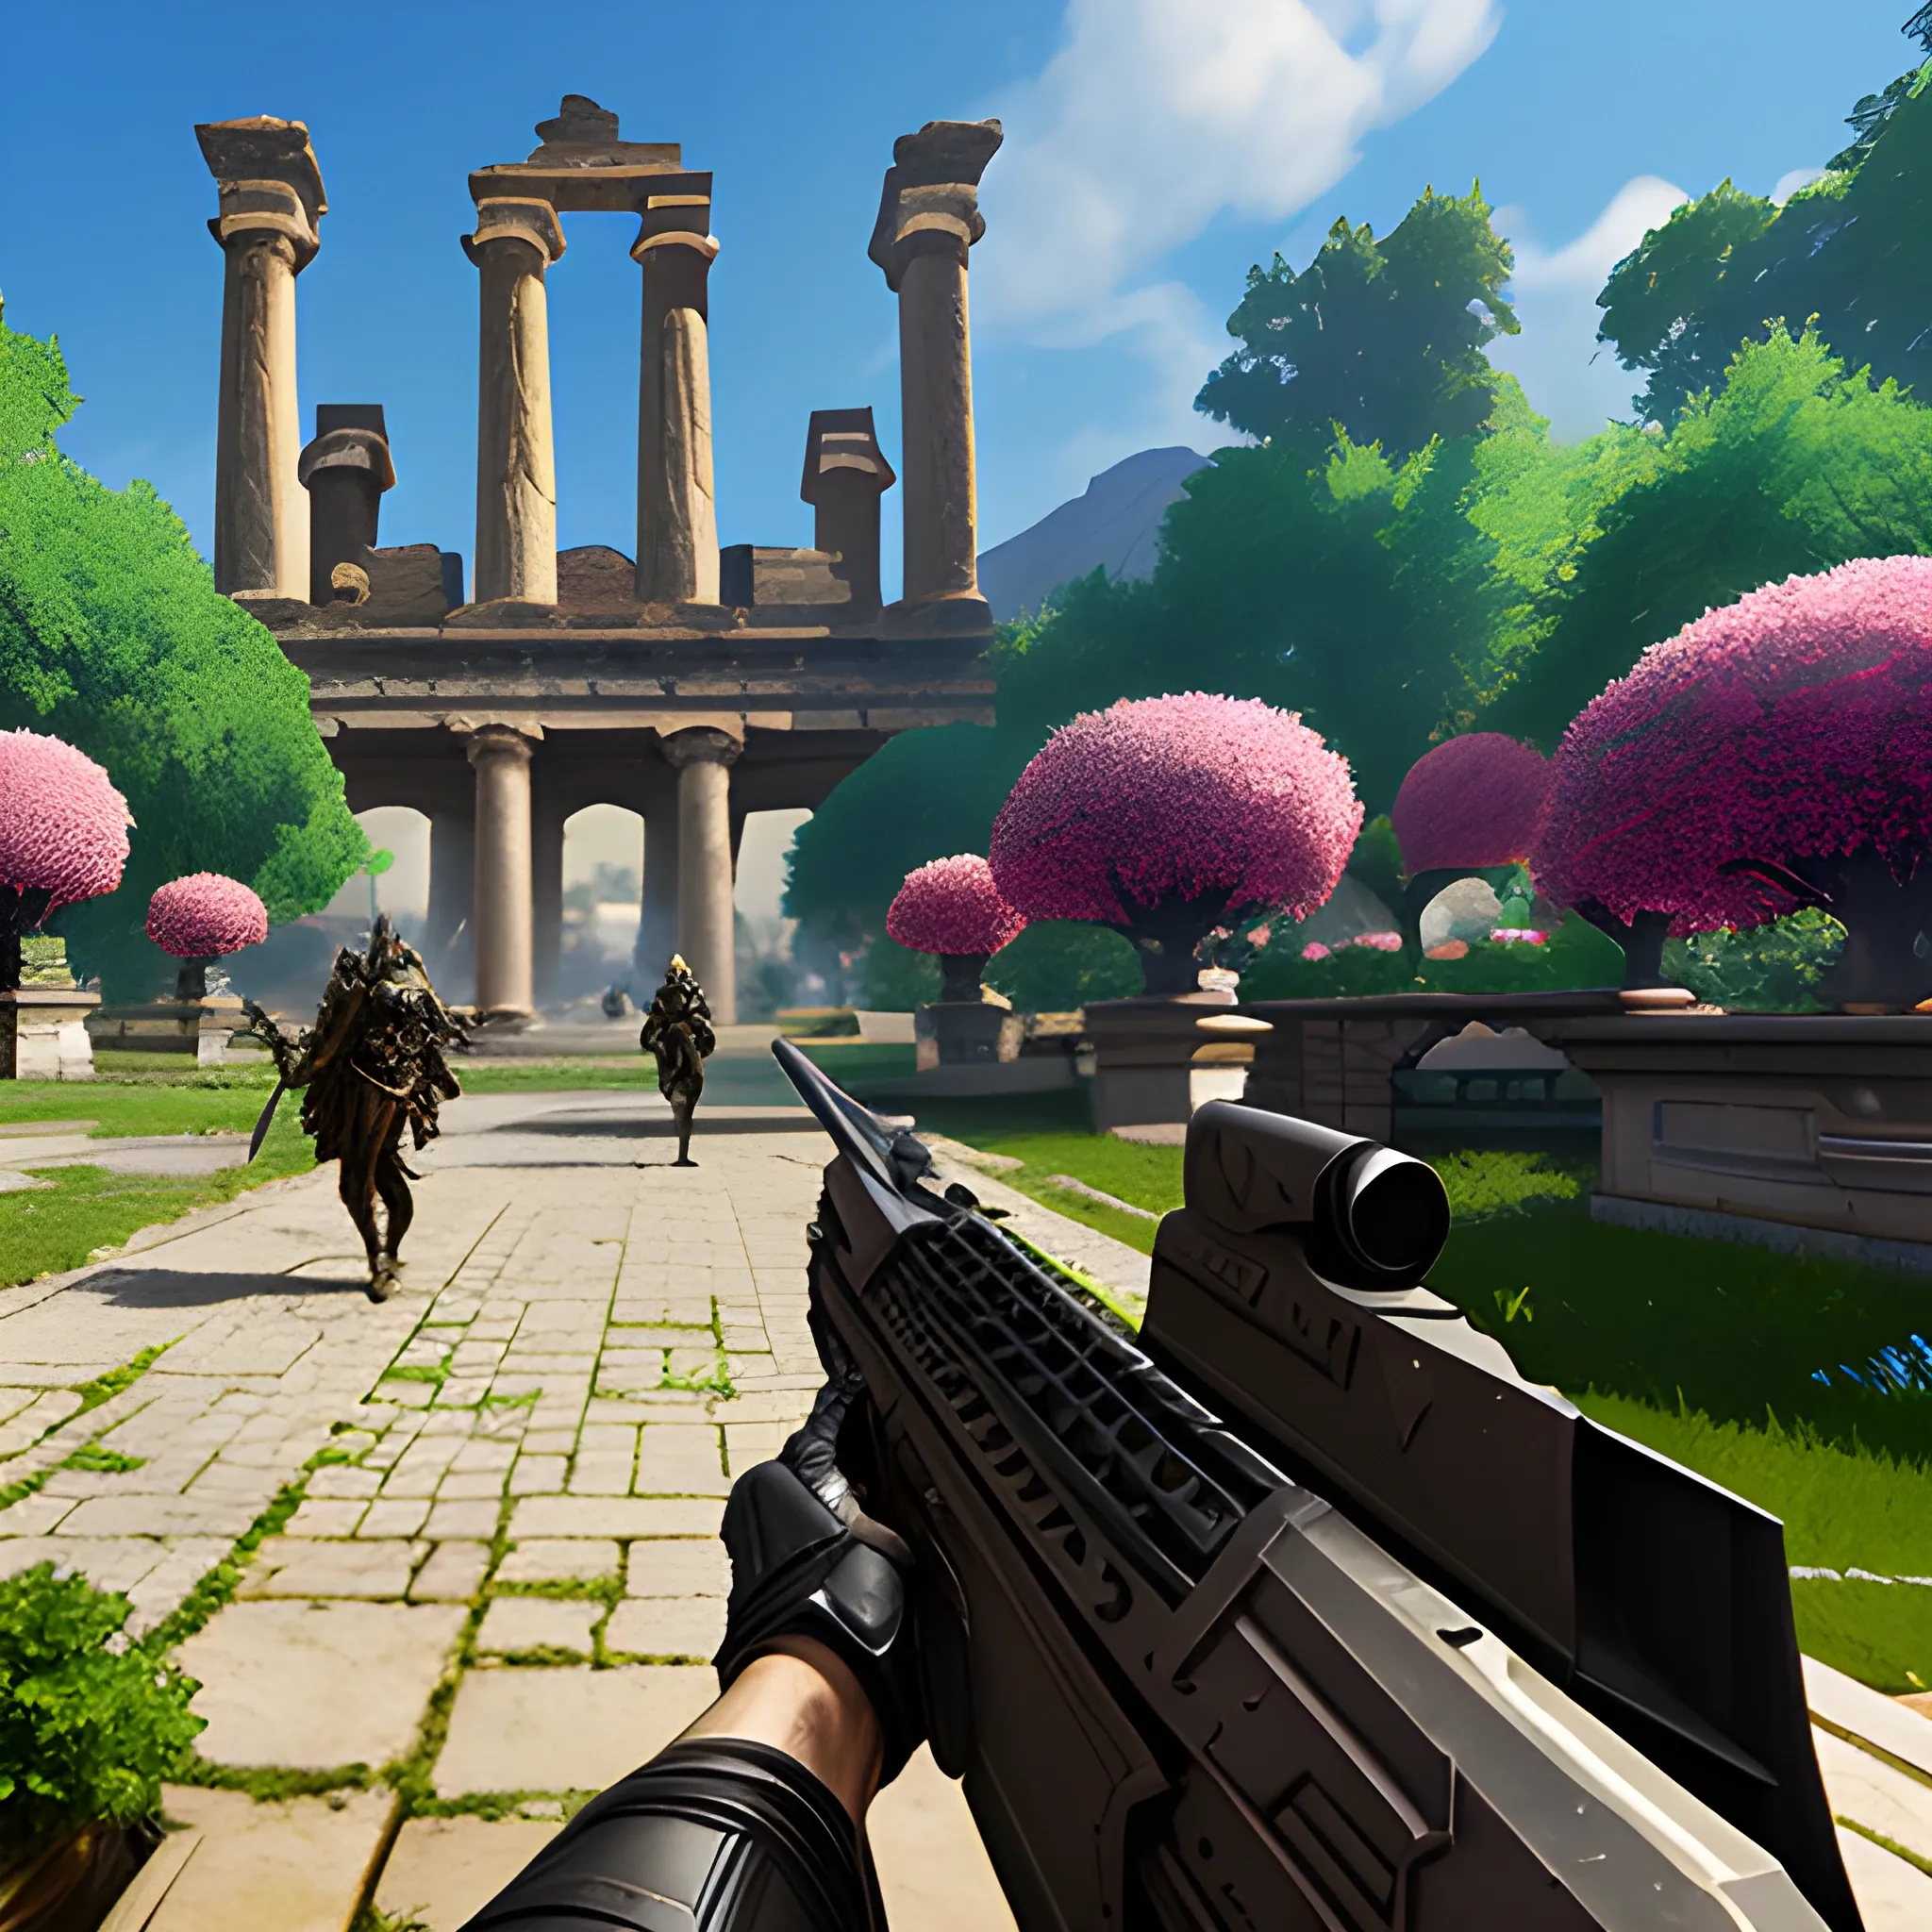 videogame screenshot with huge spangly sparkly assault rifle in foreground, with young mothers walkig babies in a municipal gardens, in the ancient world, very detailed